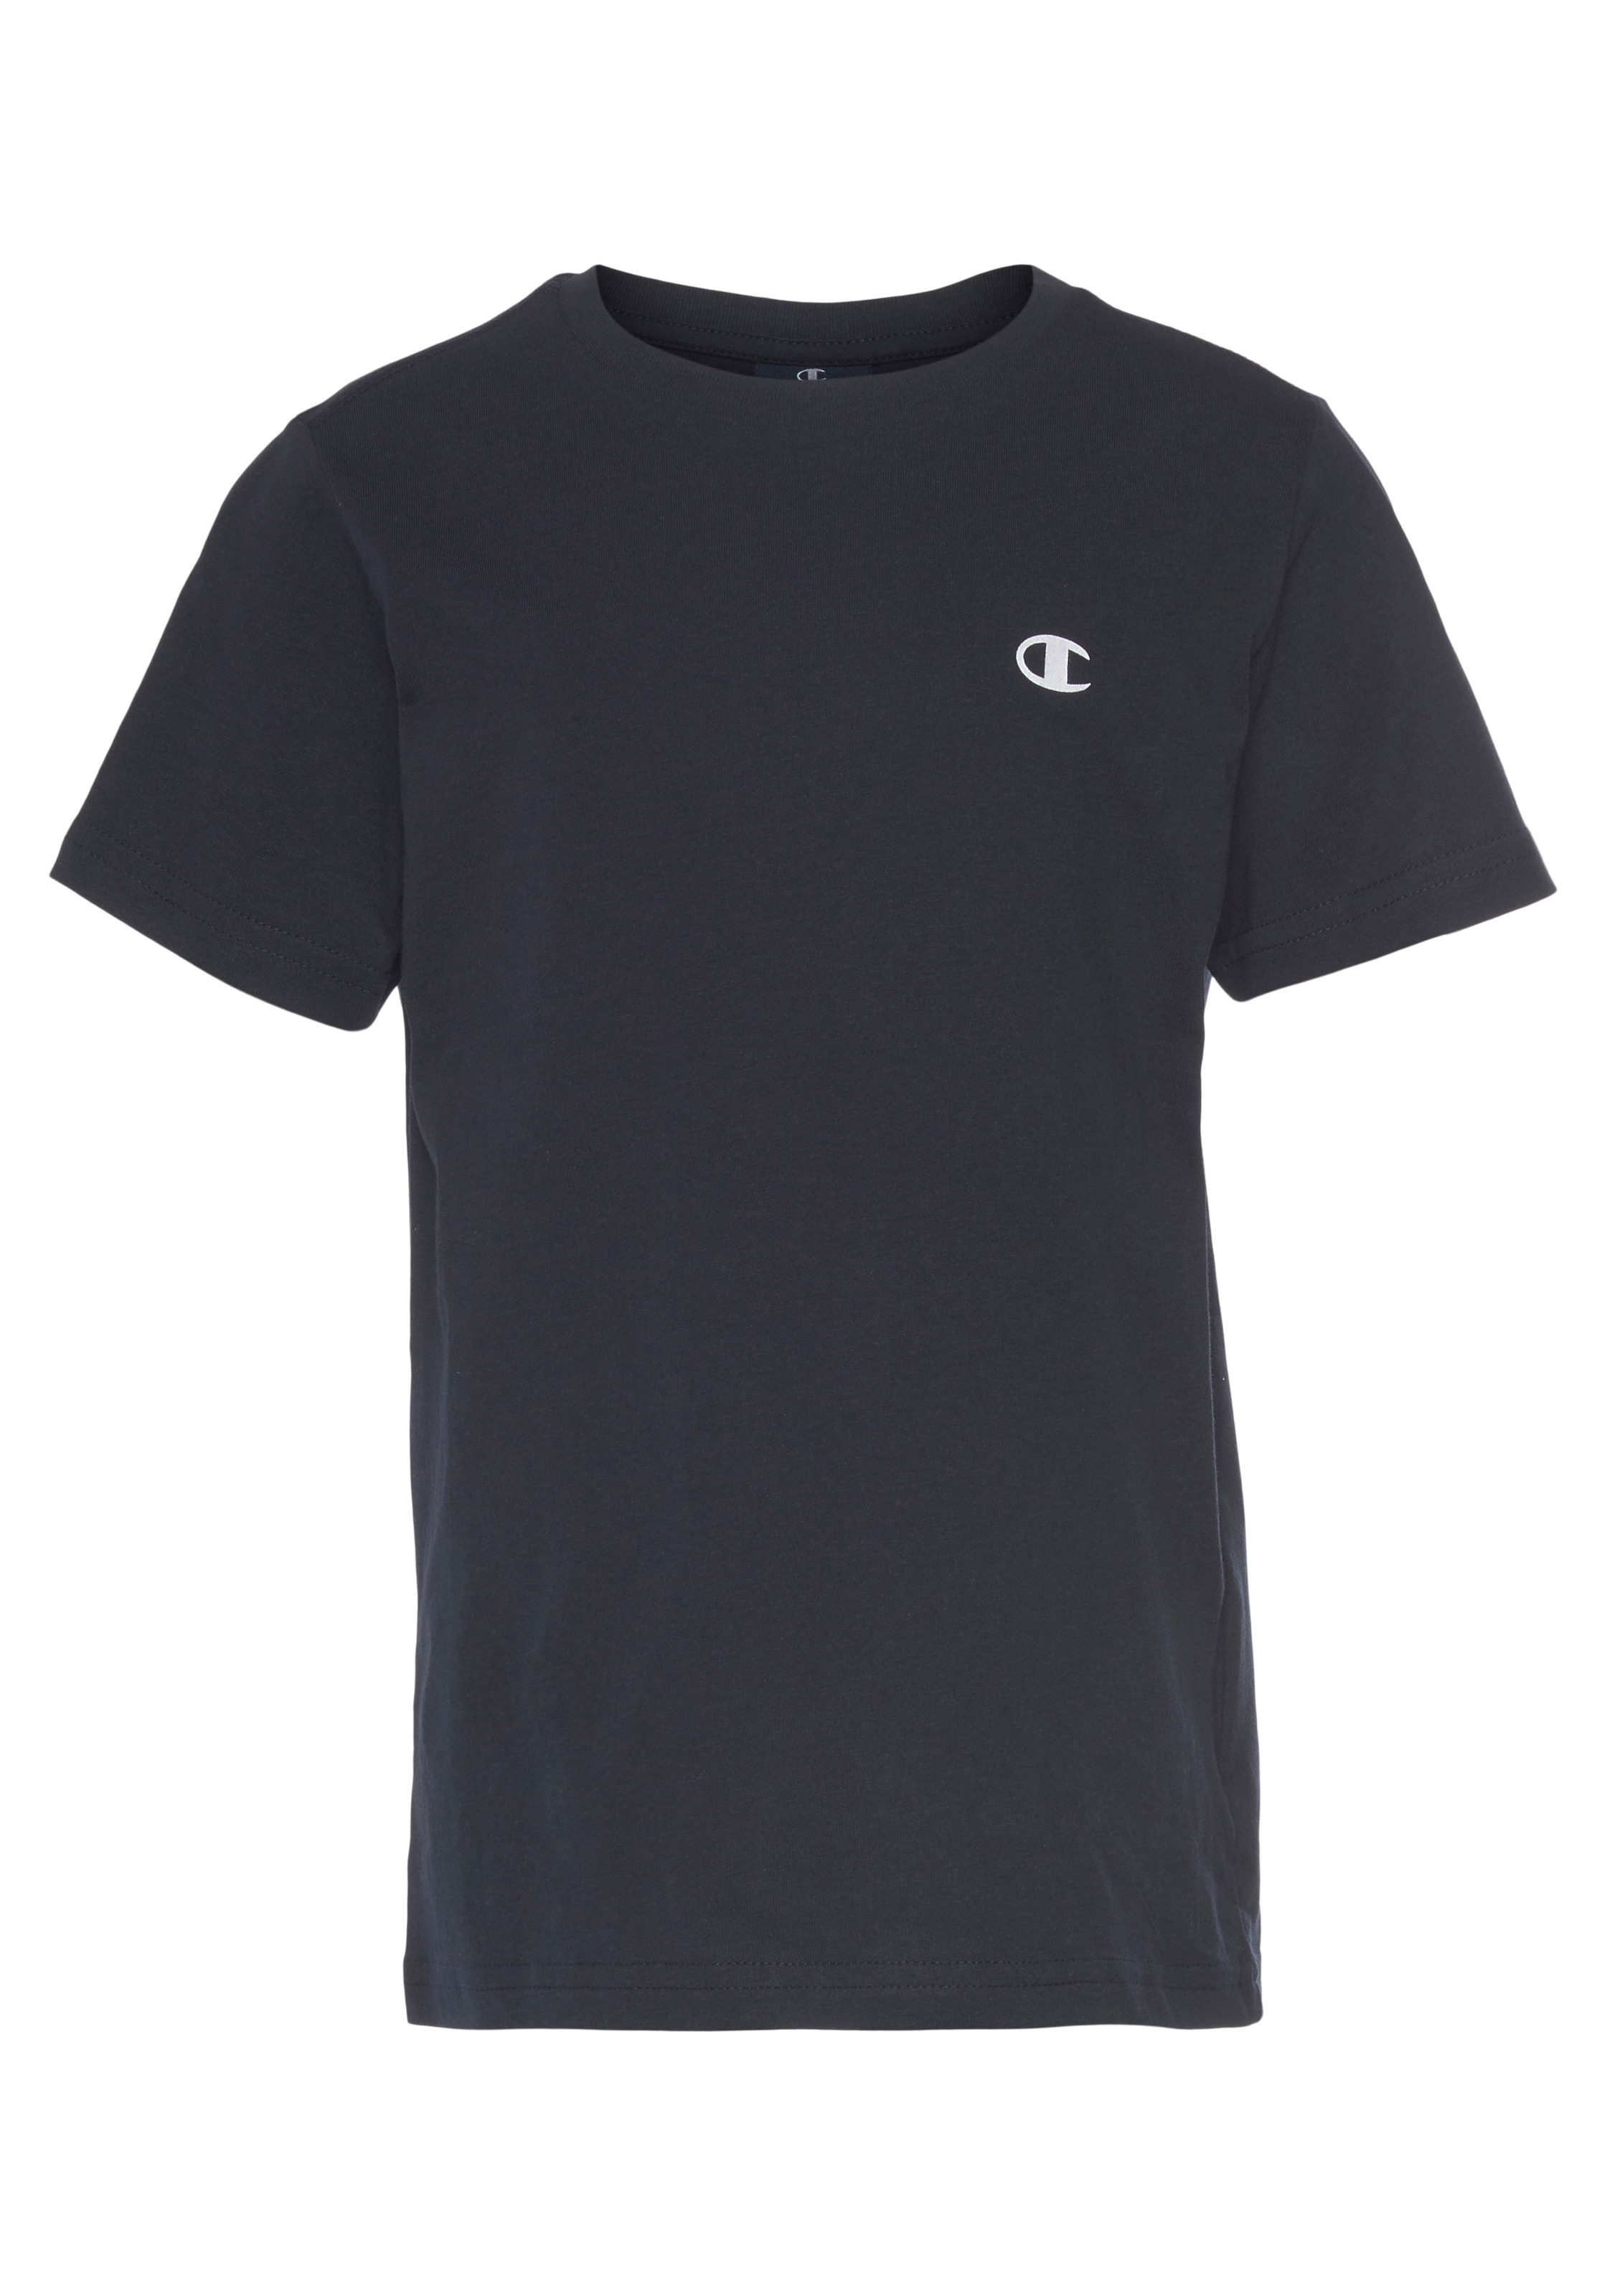 bei T-Shirt Champion CREW tlg.) NECK«, OTTO 2 »2-PCK (Packung,